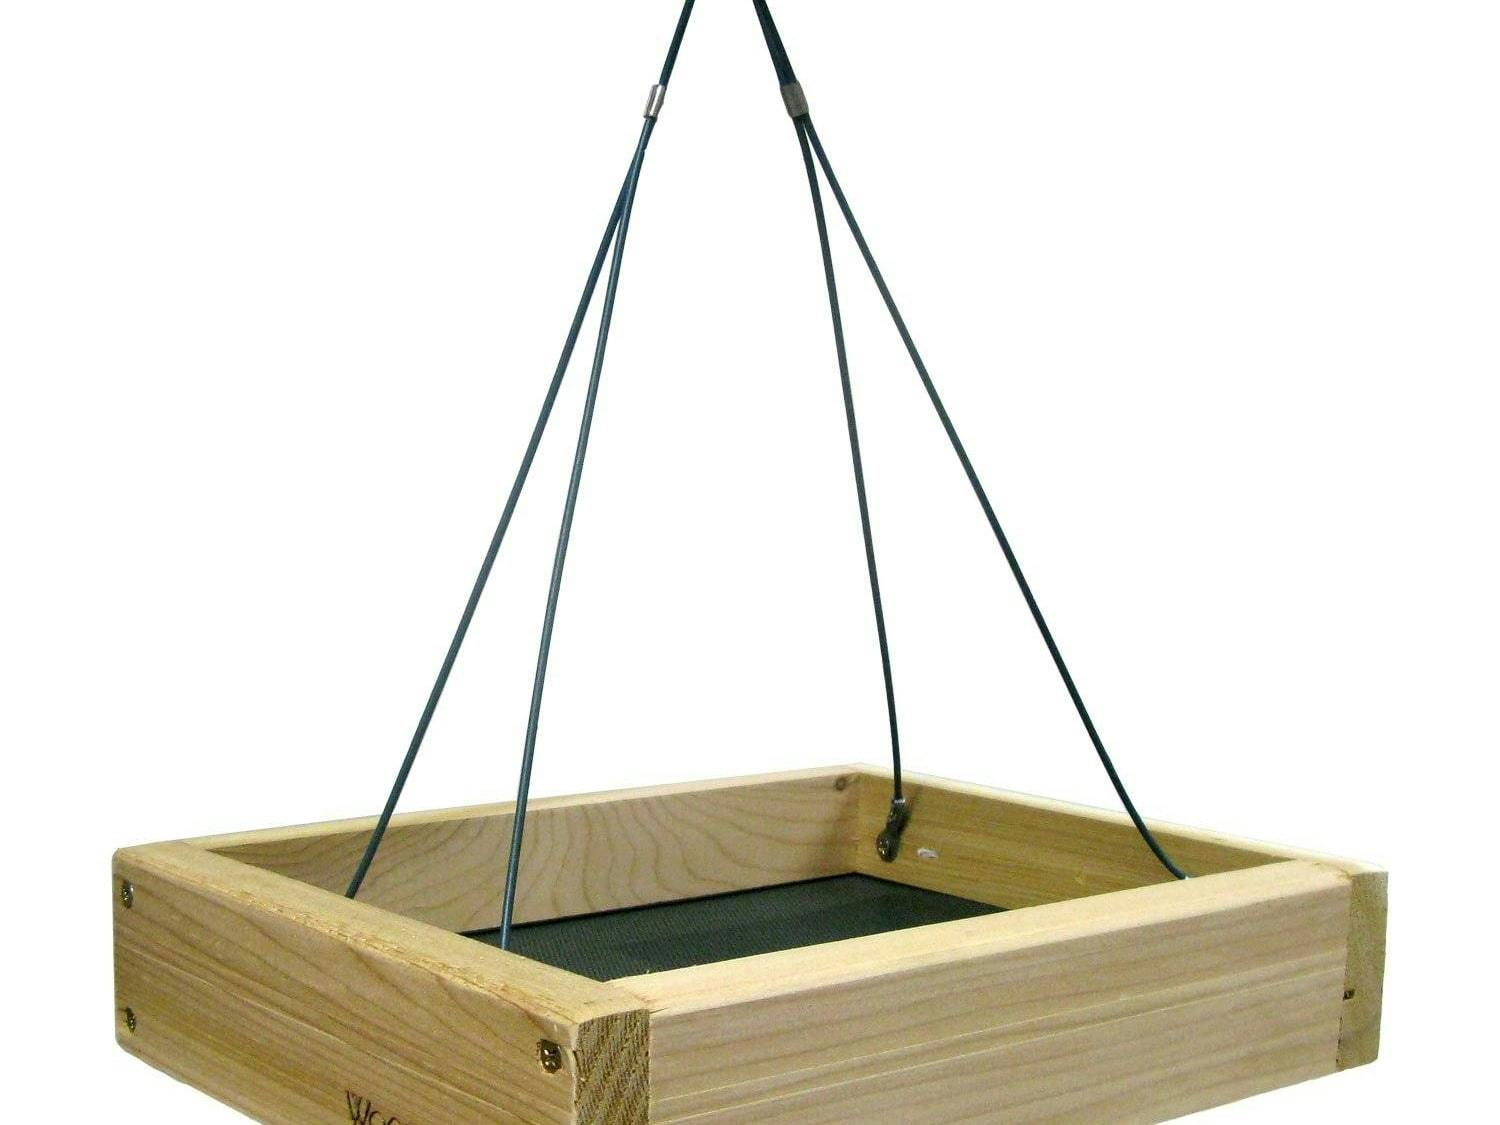 The Woodlink bird feeder is a solid and reliable choice.